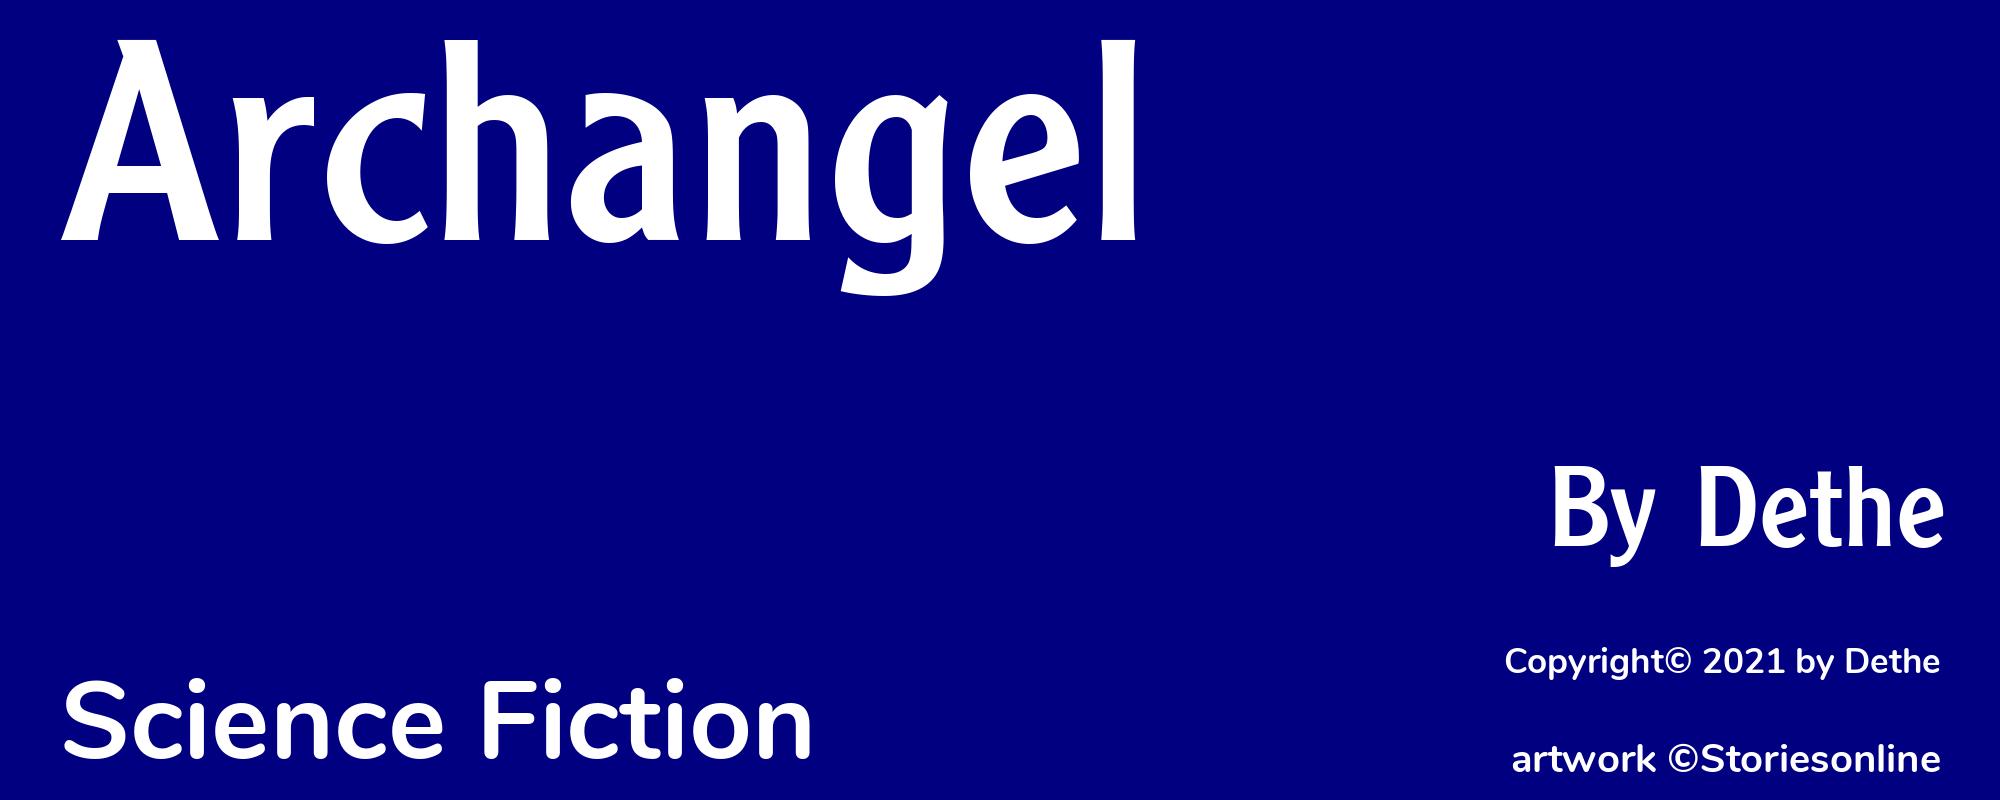 Archangel - Cover